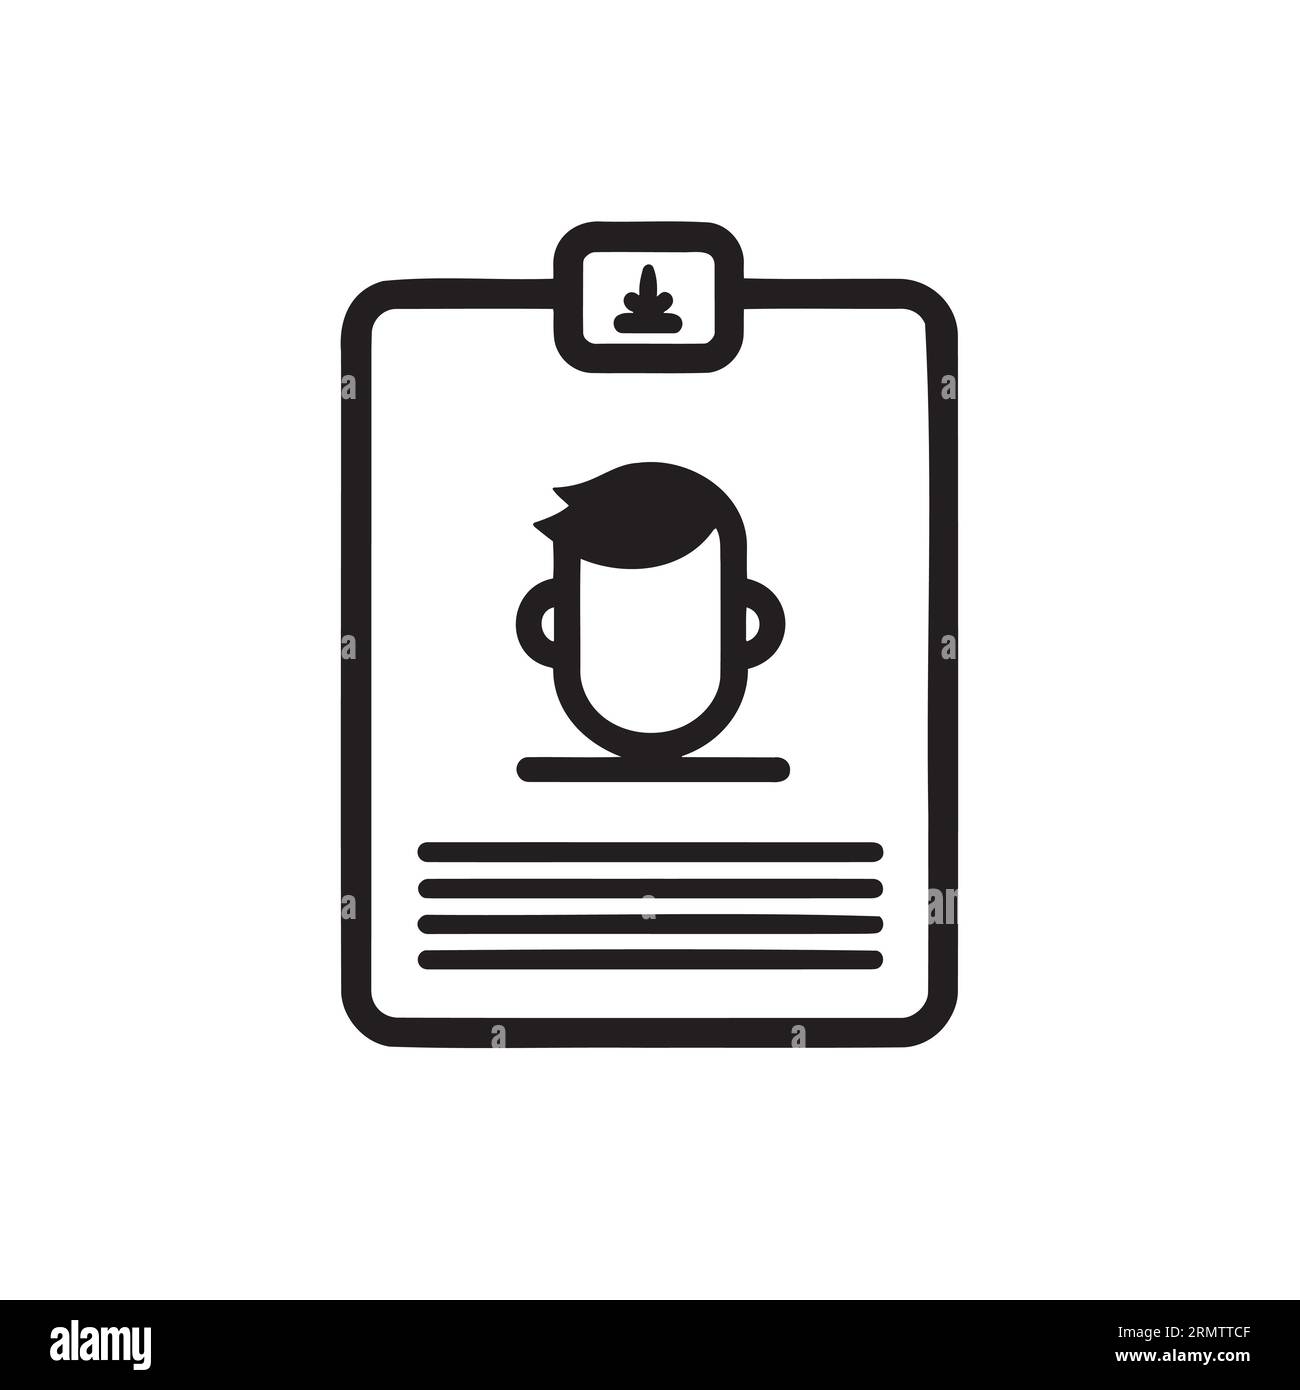 Identification card icon. Black and white illustration Stock Vector